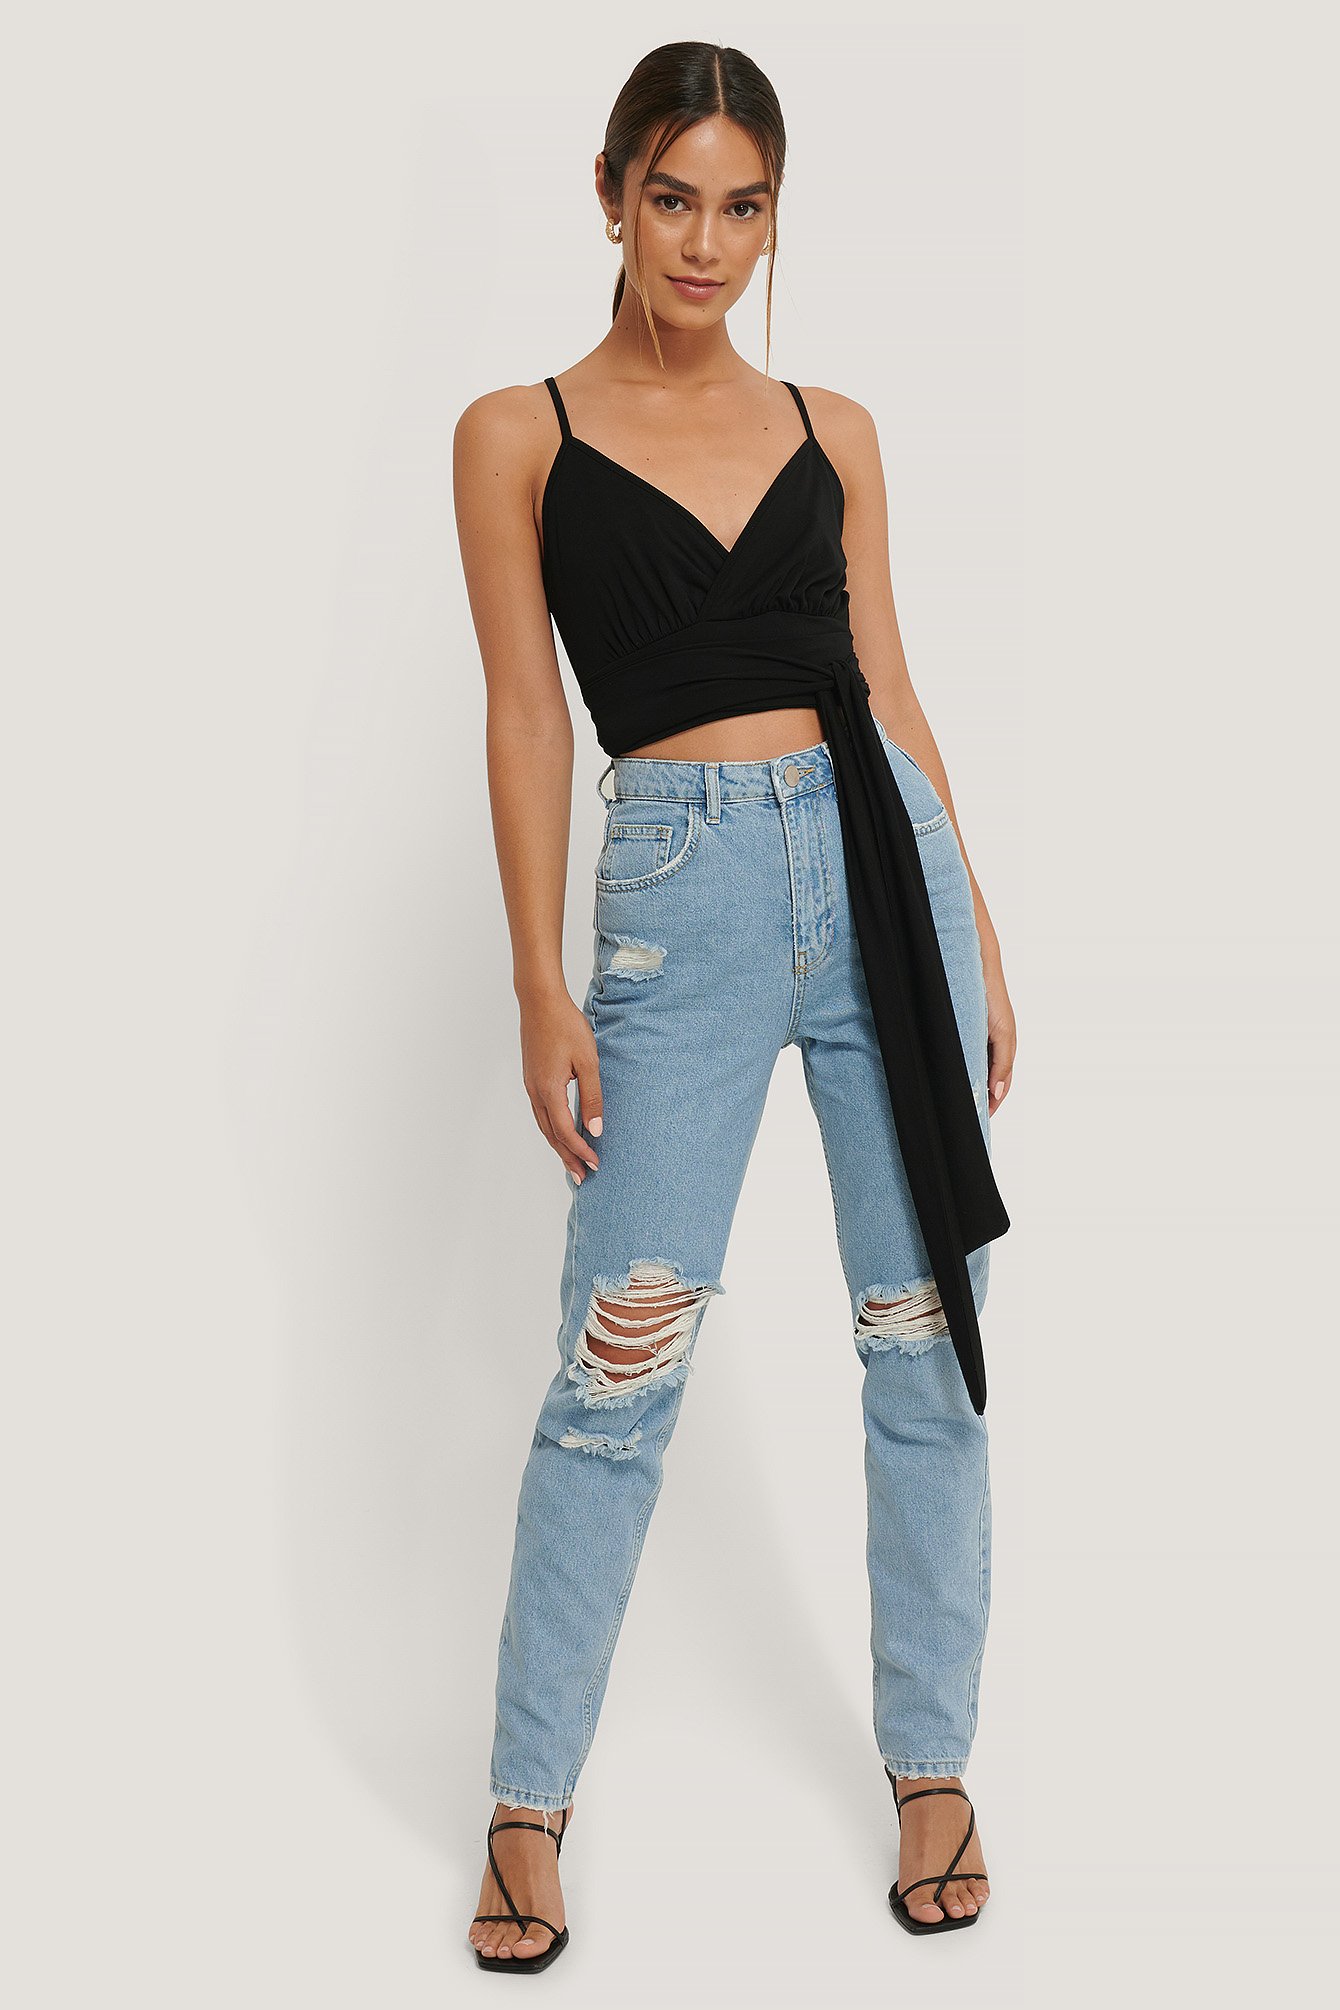 Ripped Knee Jeans Outfit